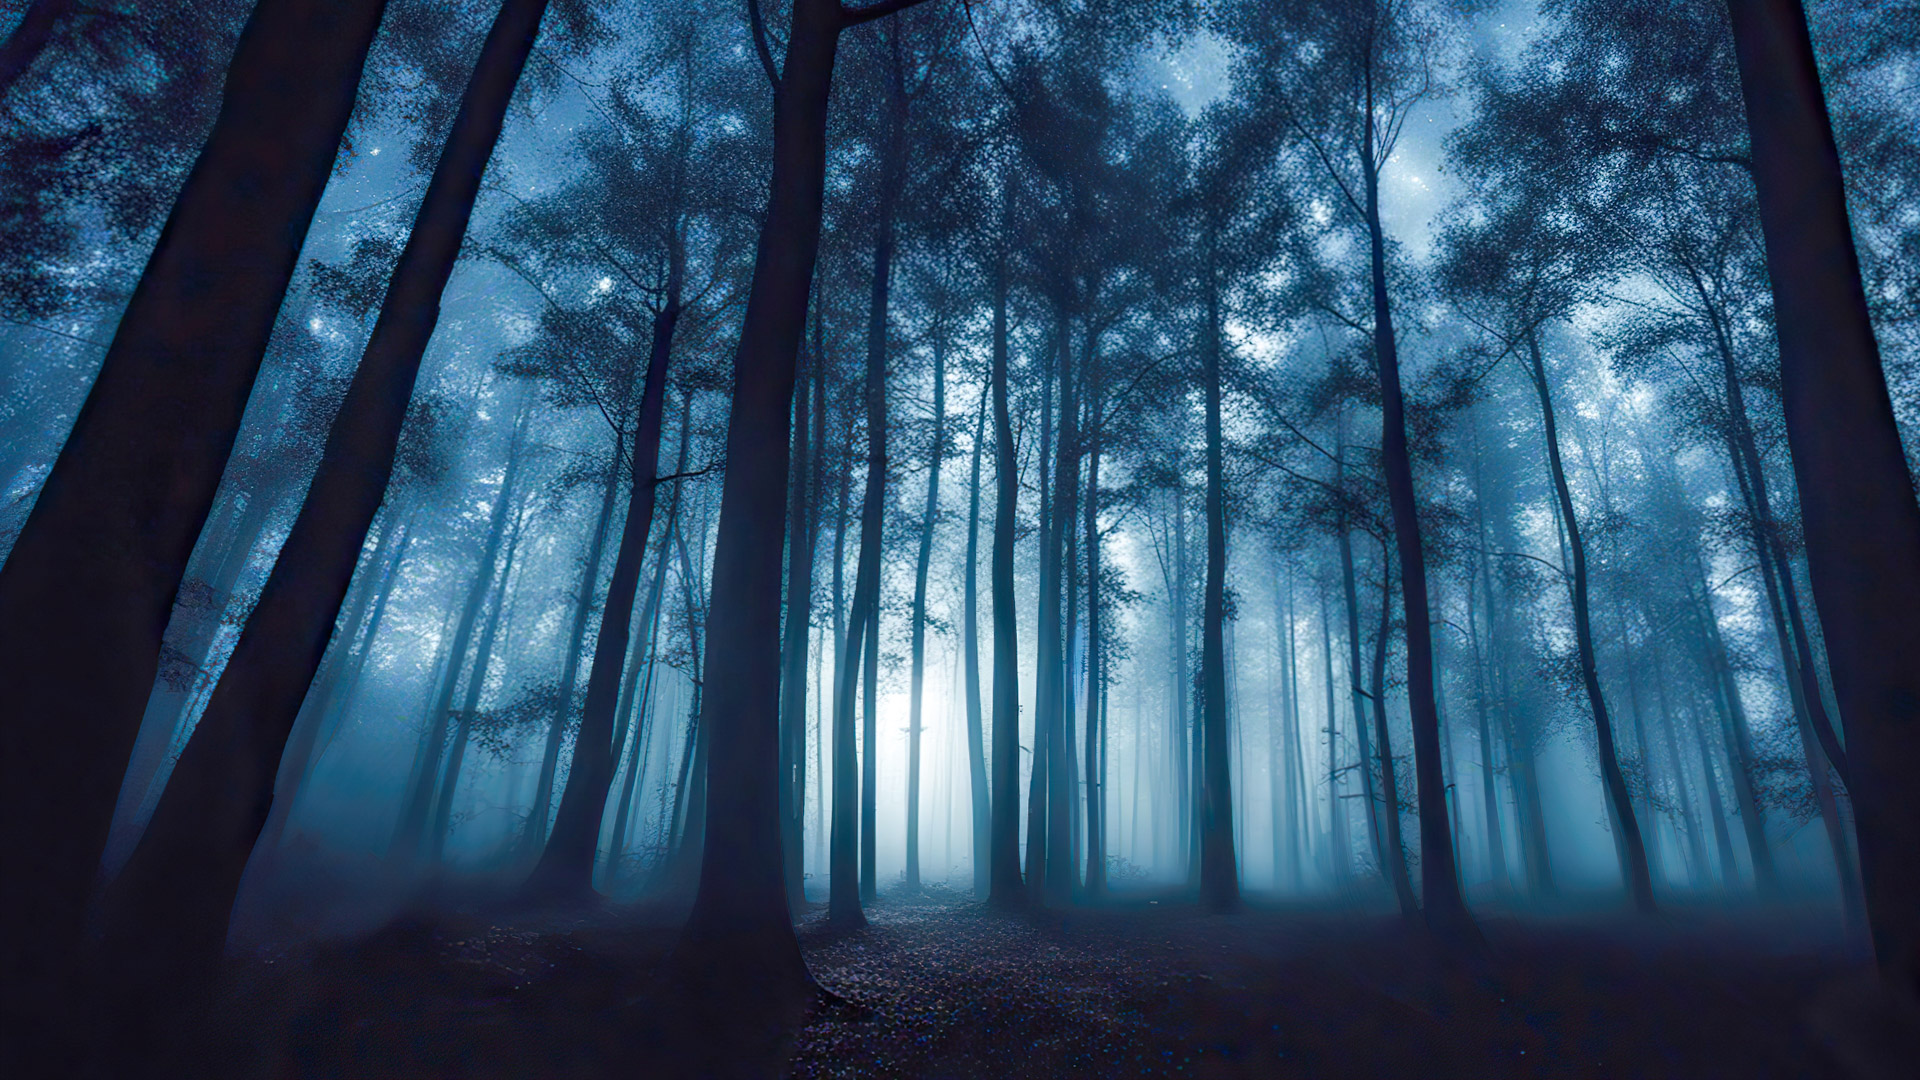 Get lost in the mystery of our nature wallpaper in HD for desktop, full screen, and 1080p, illustrating a mysterious forest at night, where moonlight filters through the trees, creating an enchanting and eerie atmosphere.